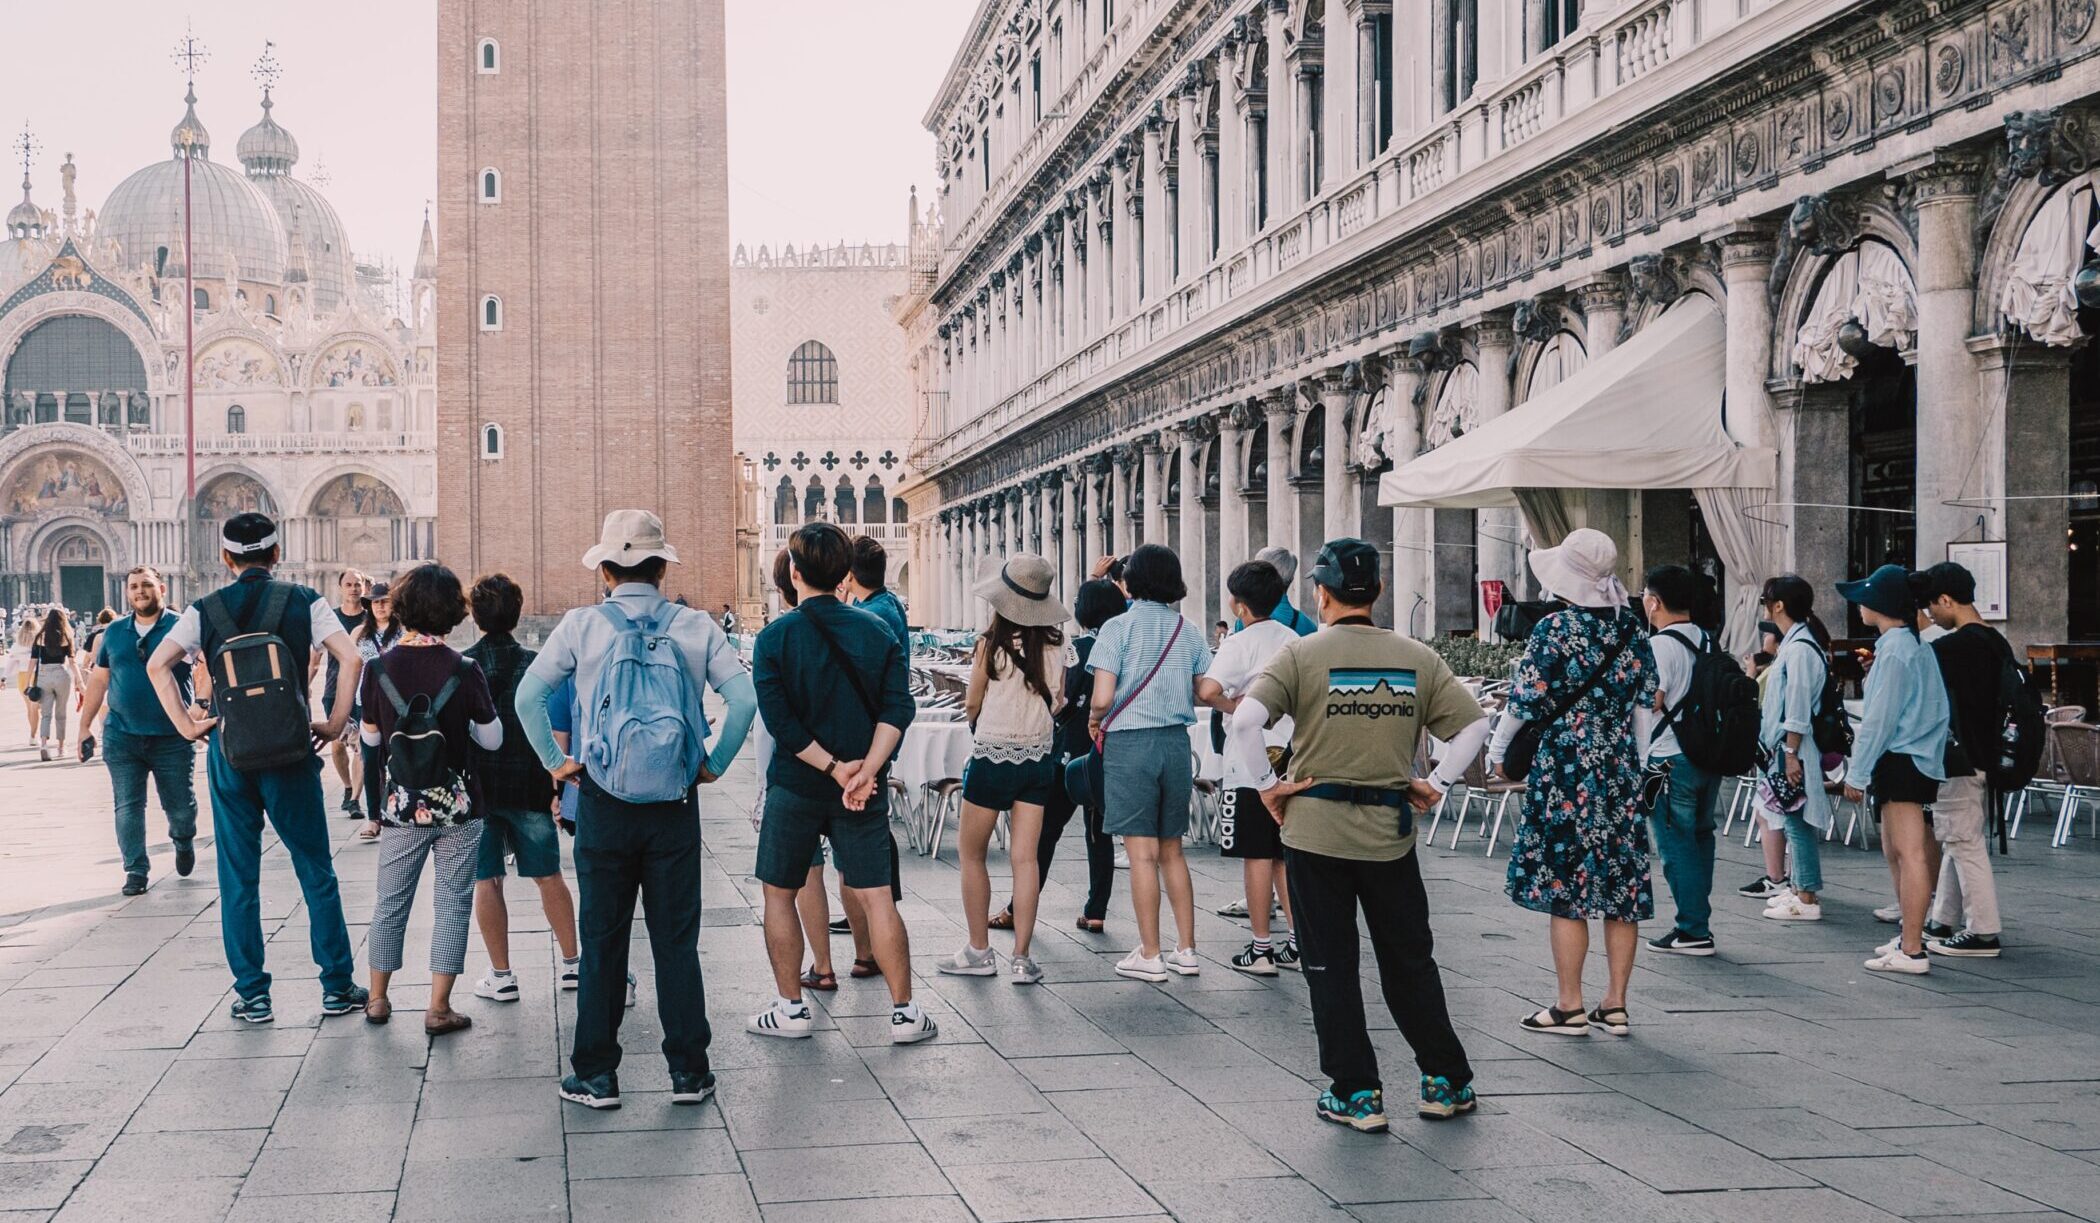 Tourists in Venice